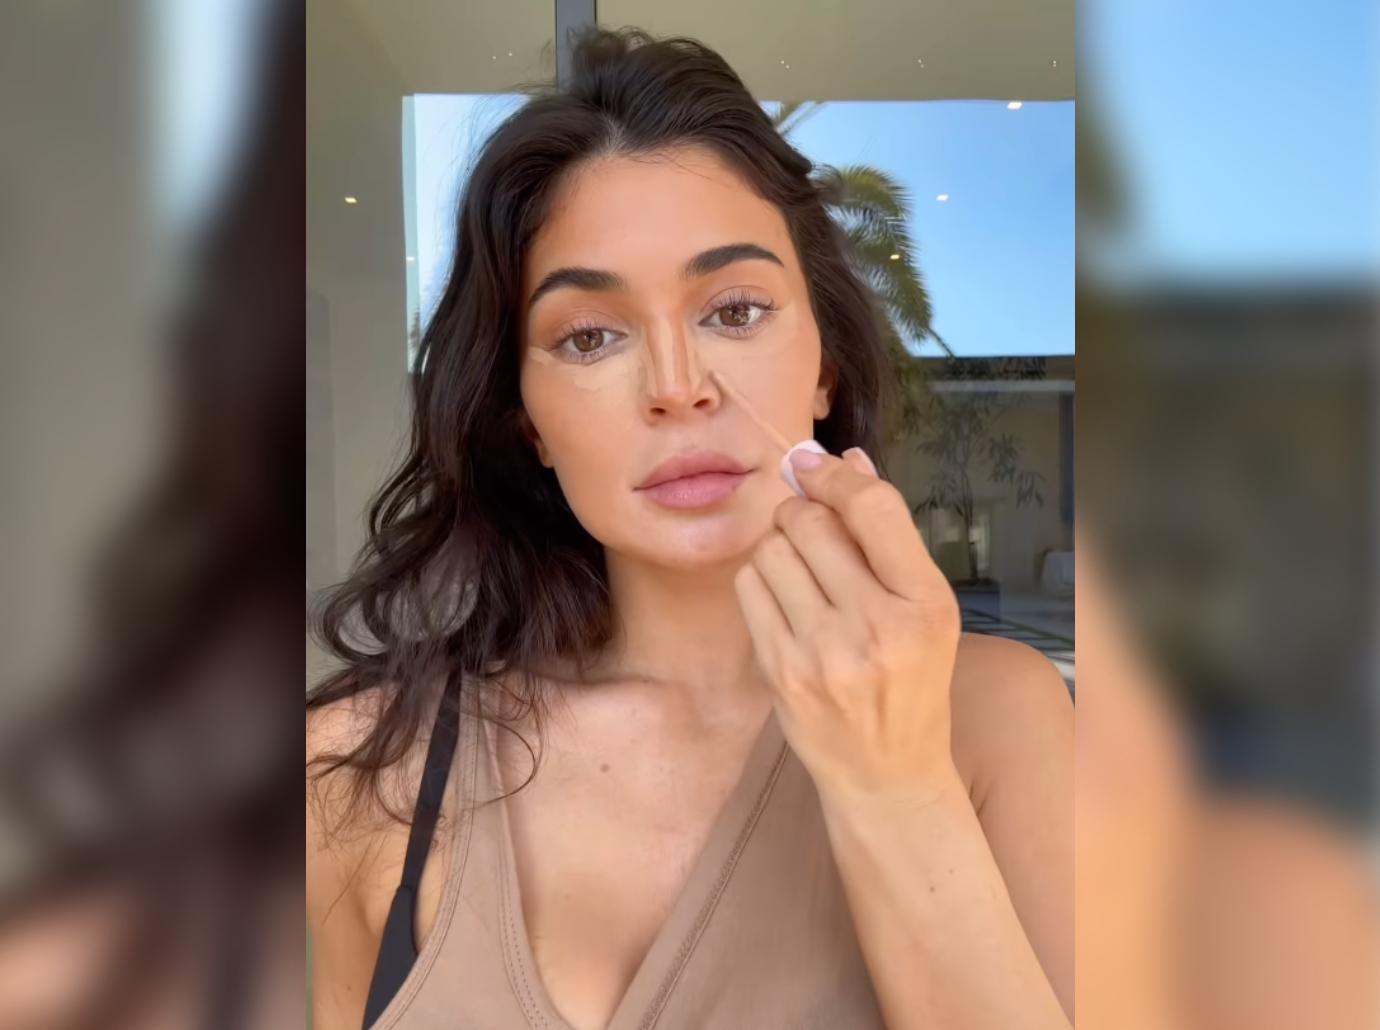 Kylie Jenner slammed for 'ridiculous' lips as star busts out of black bra  in sexy TikTok video